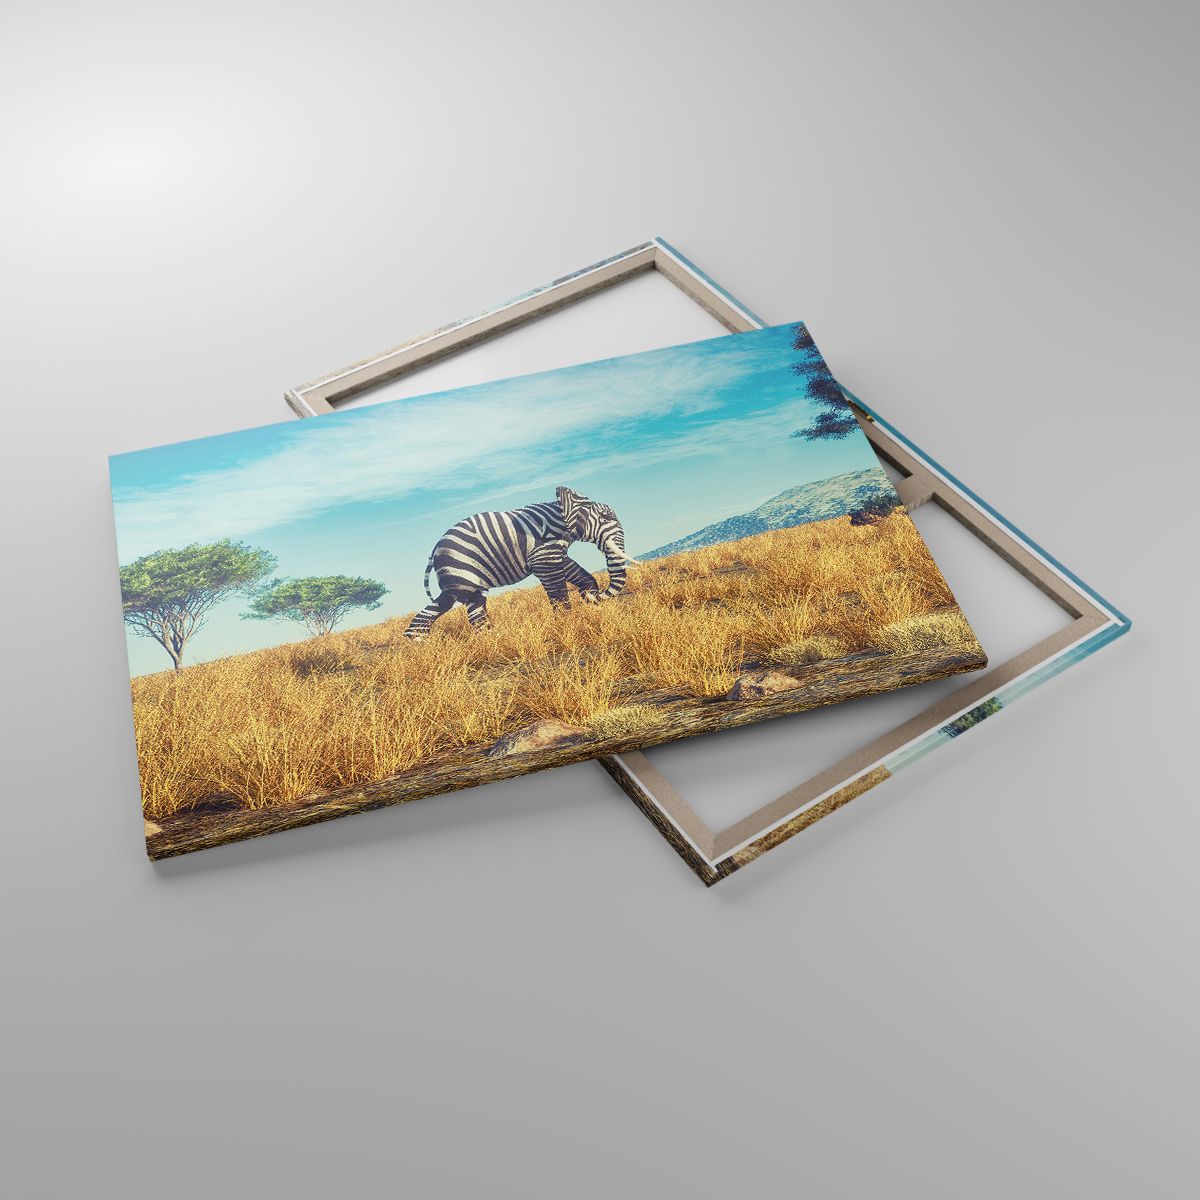 Canvas picture Abstraction, Canvas picture Elephant, Canvas picture Ribs, Canvas picture Landscape, Canvas picture Africa